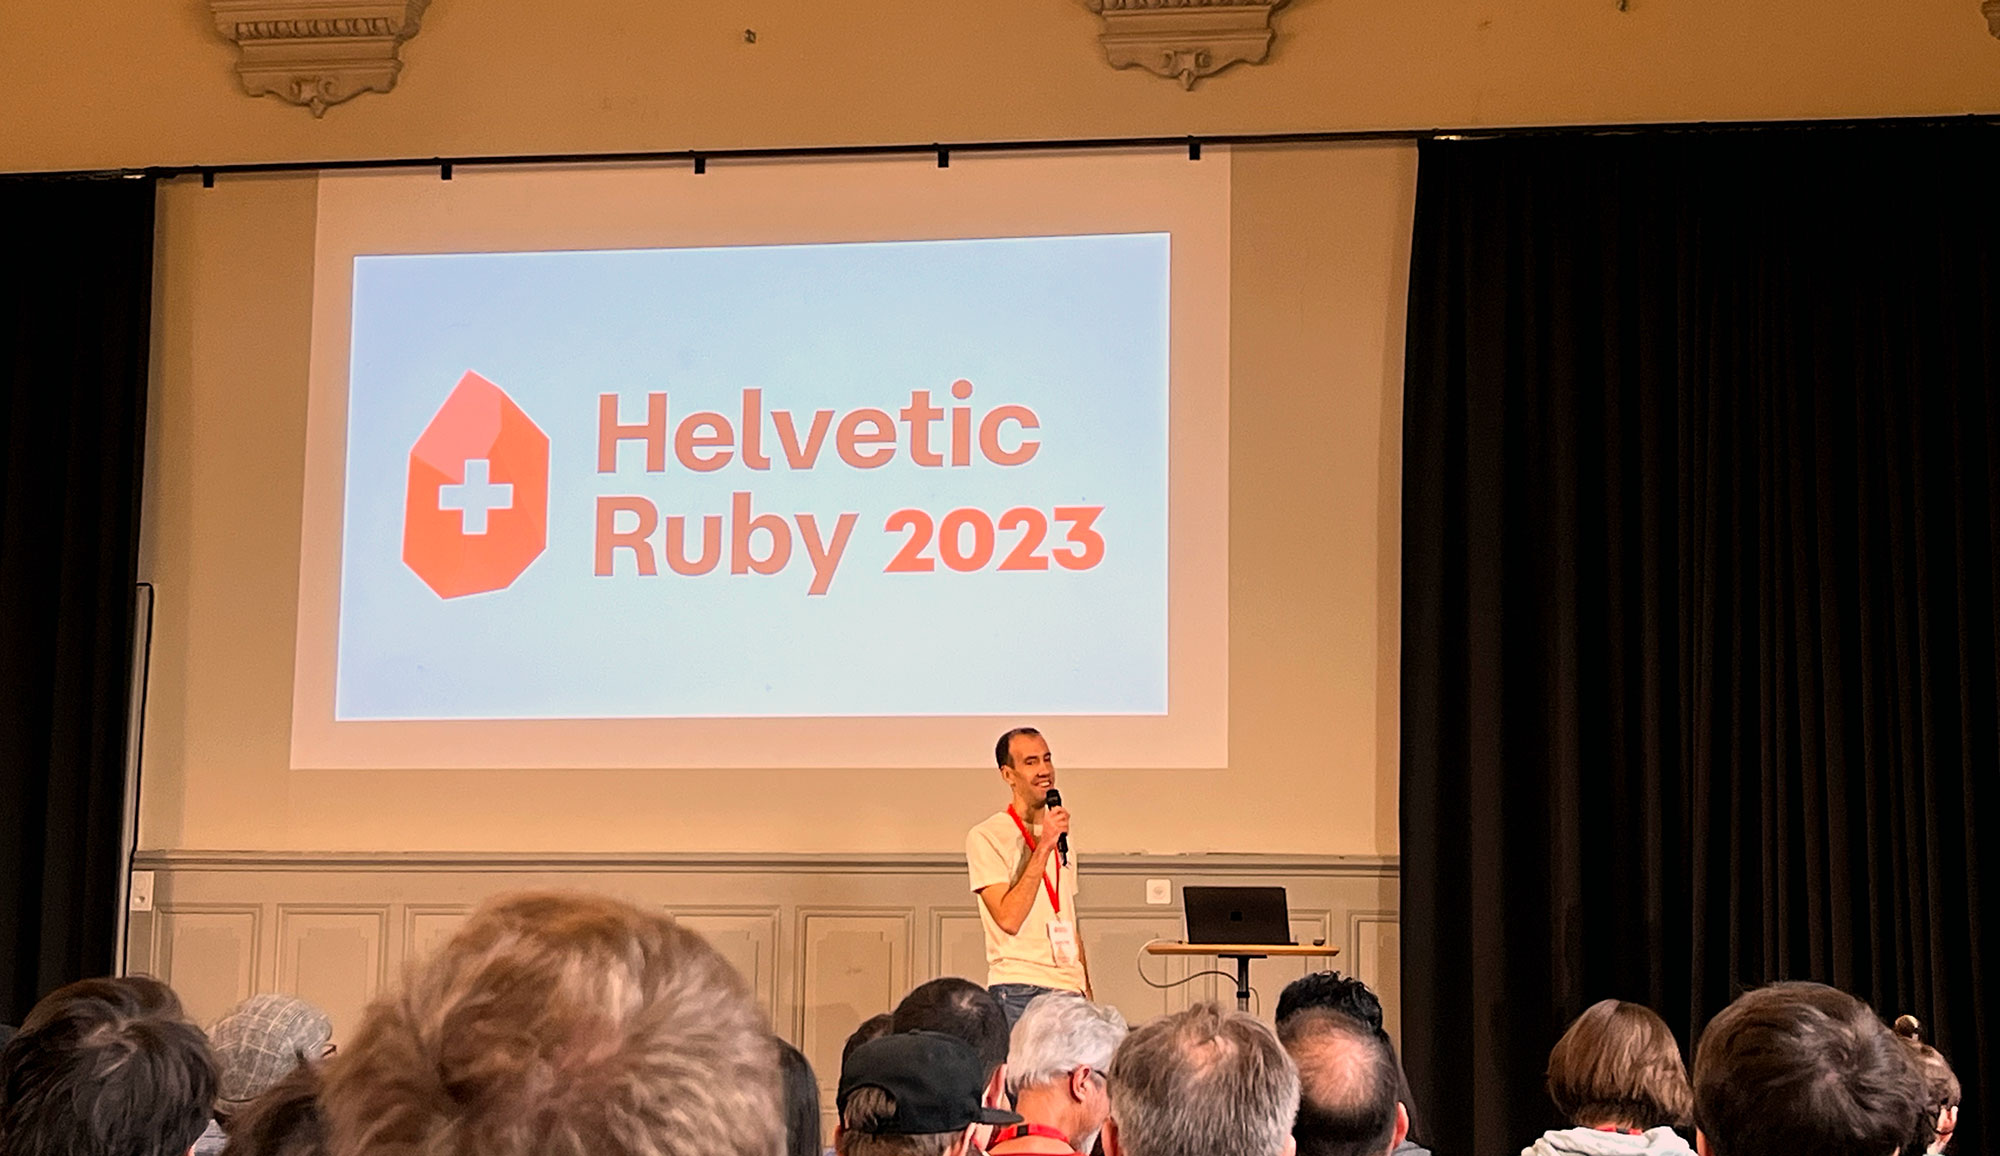 Dimiter Petrov kicks off the first Swiss Ruby conference